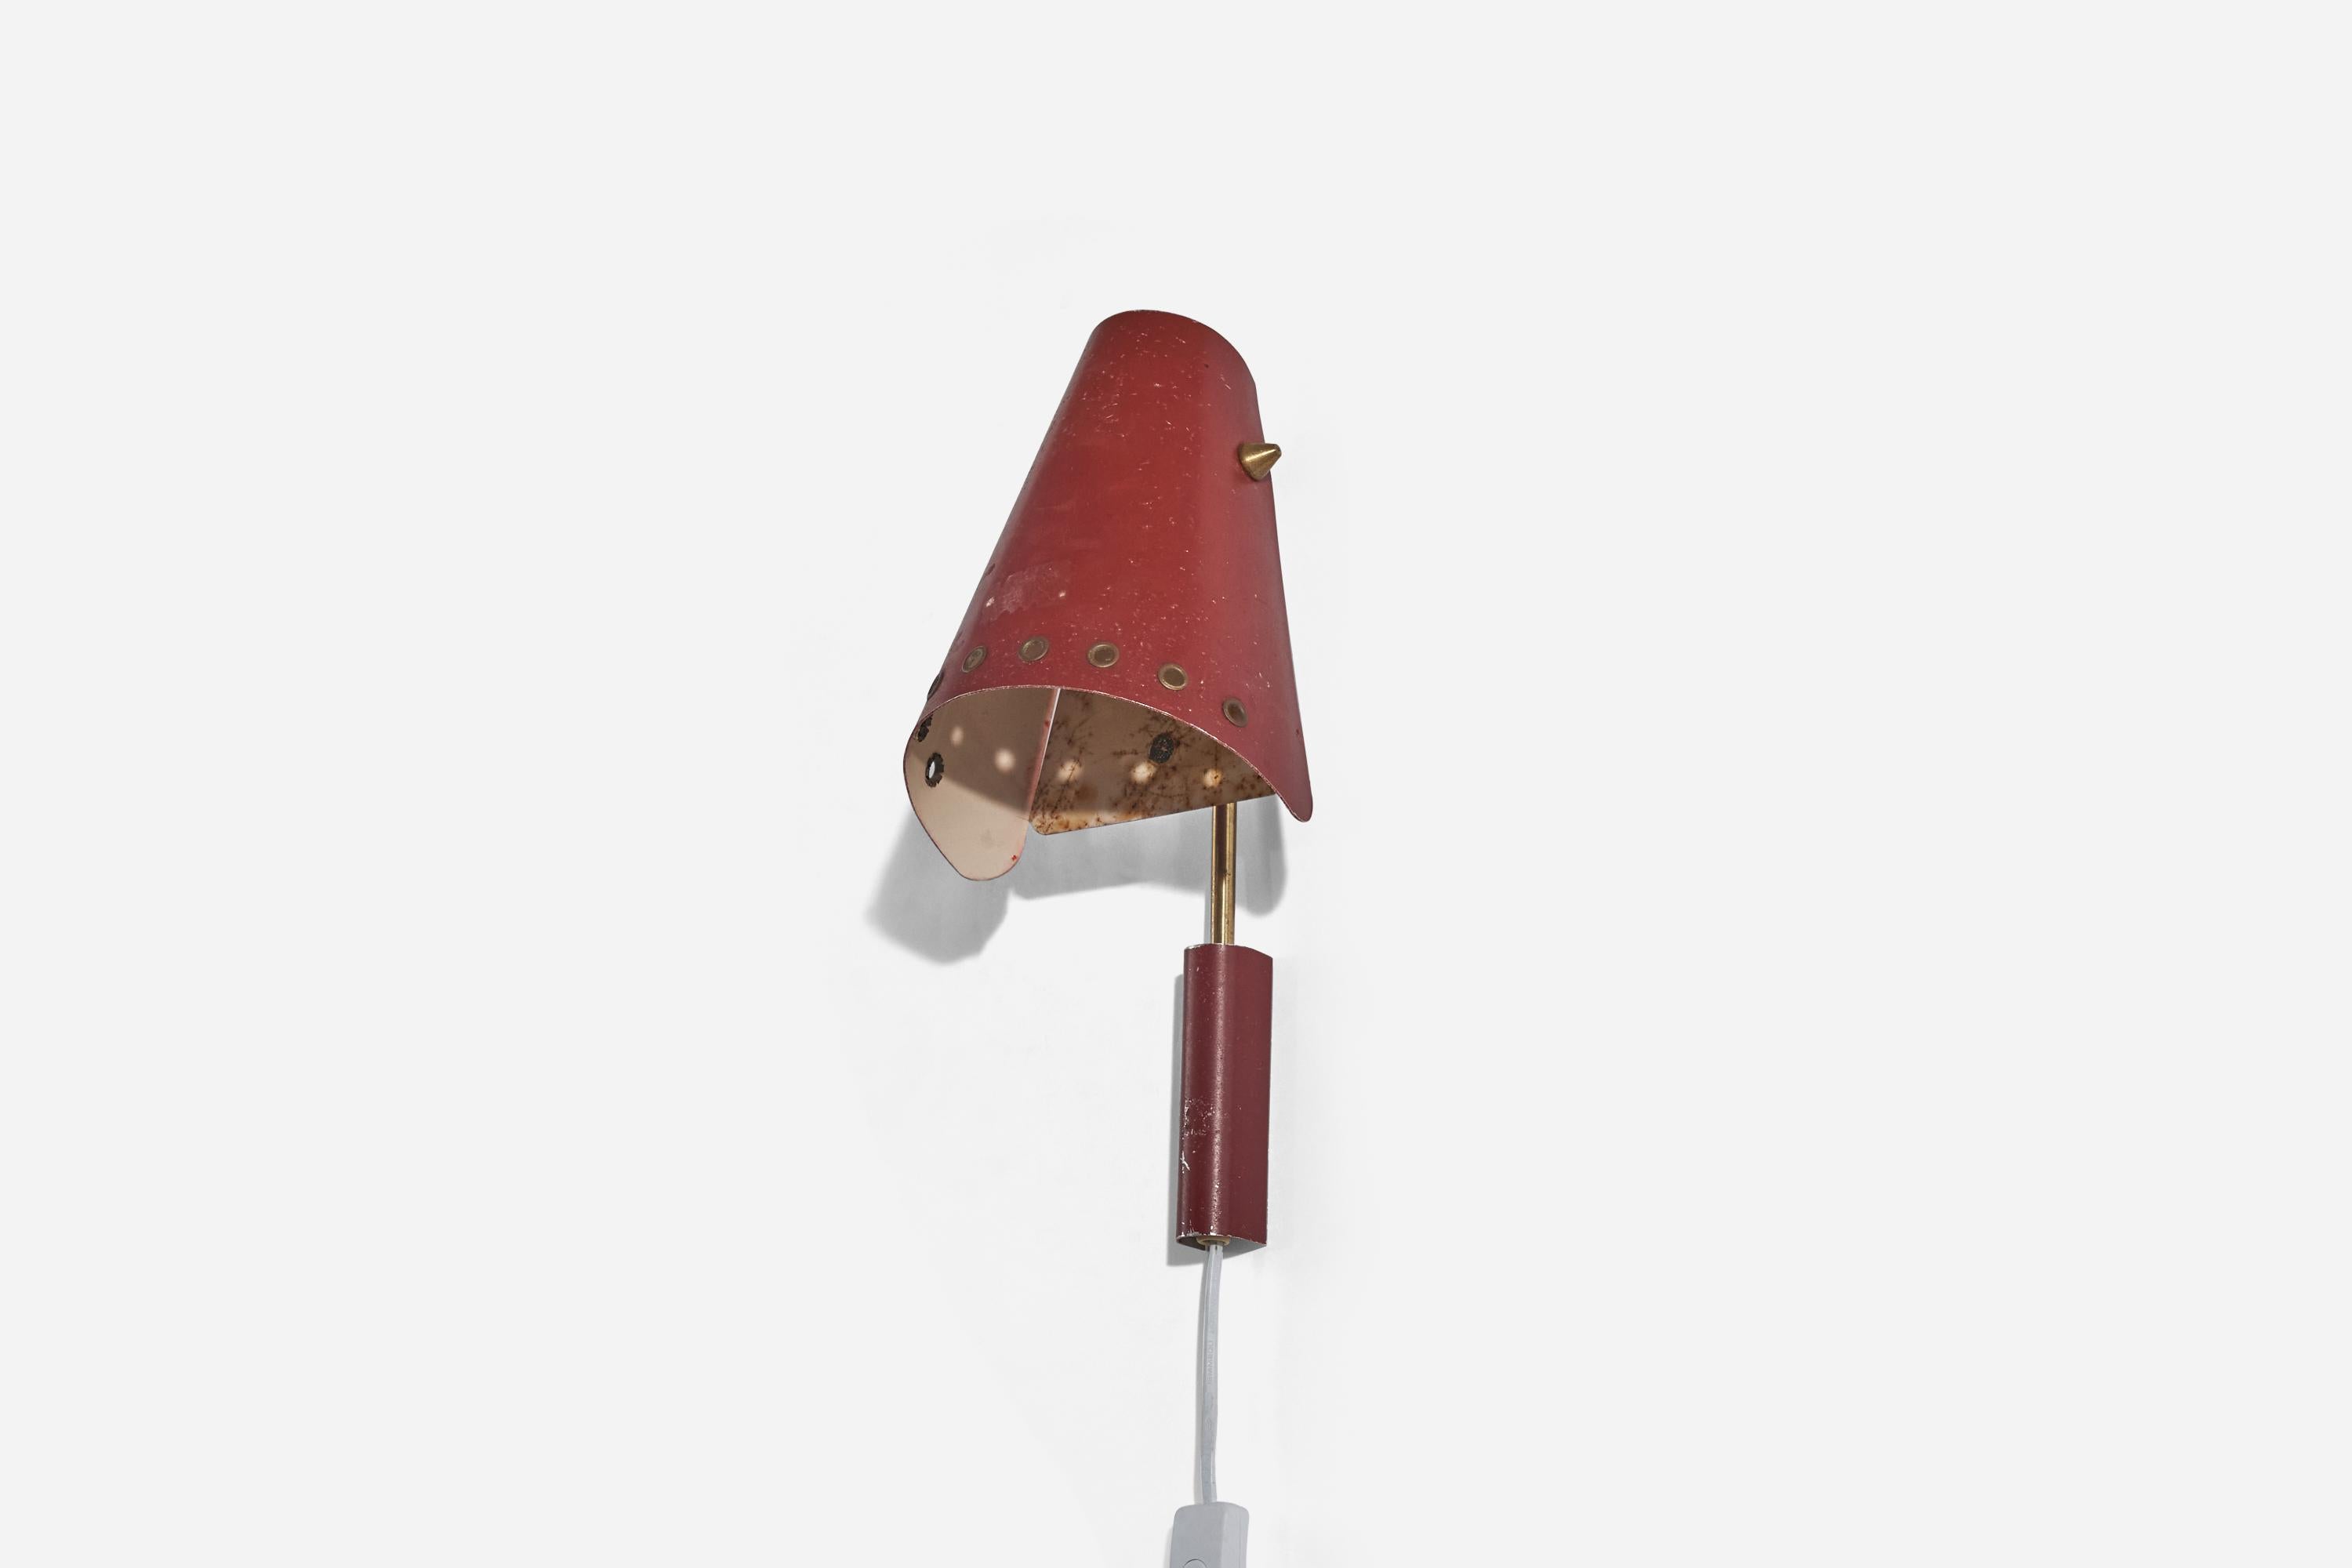 A brass and red lacquered metal wall light designed and produced in Sweden, c. 1950s.

Dimensions of back plate (inches) : 4.21 x 1 x 1 (H x W x D).